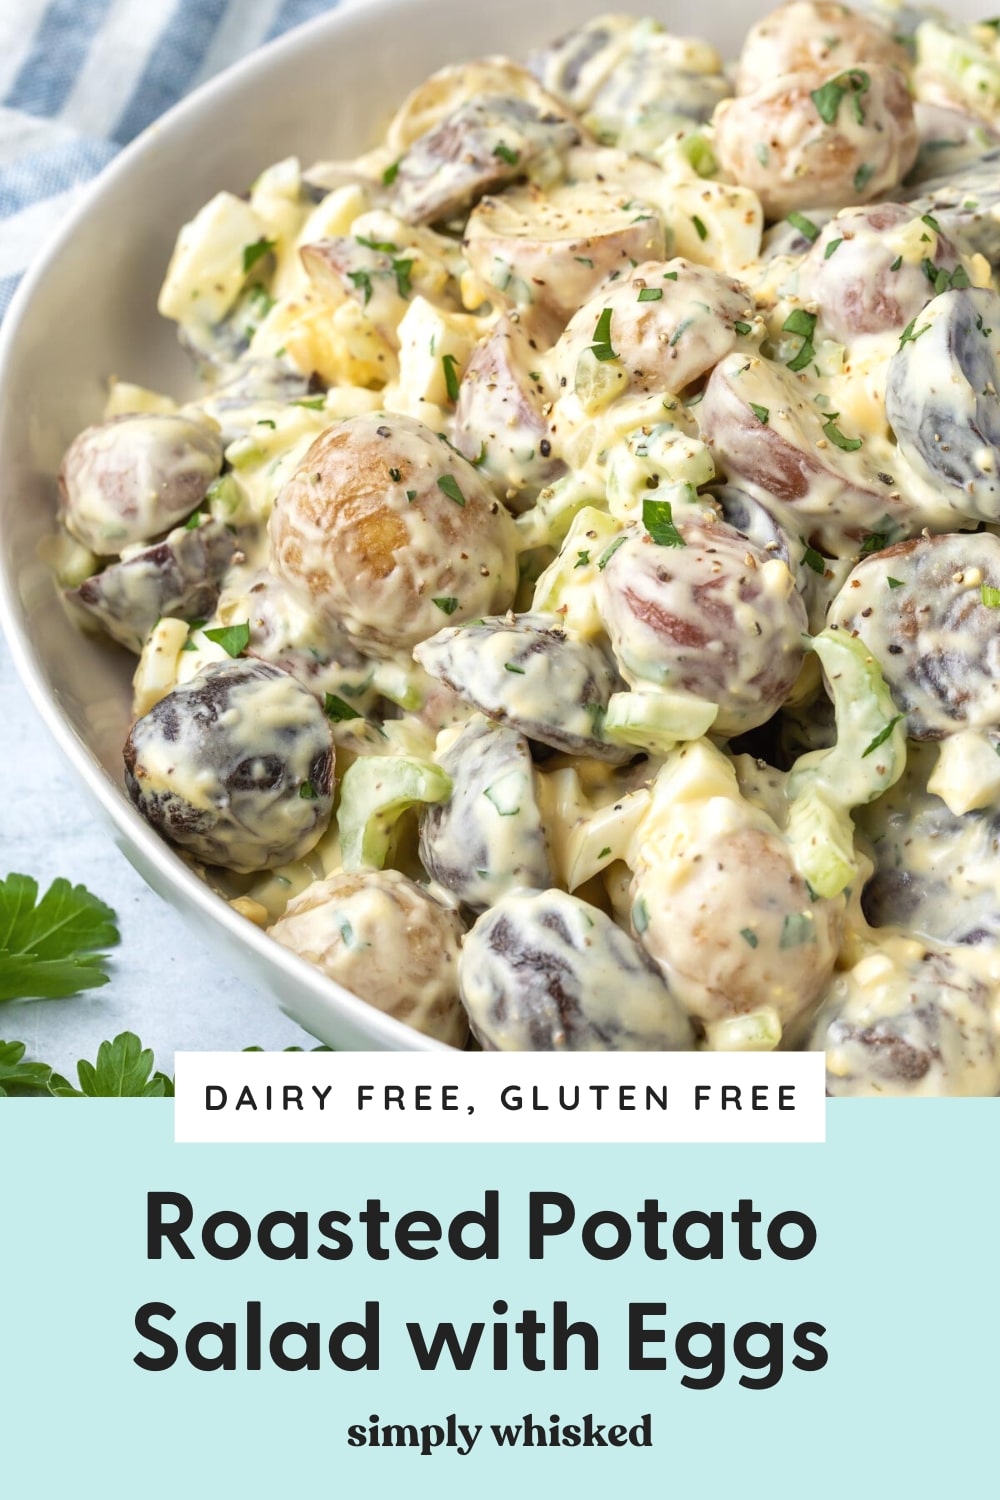 roasted potato salad with eggs (image has text overlay for Pinterest)